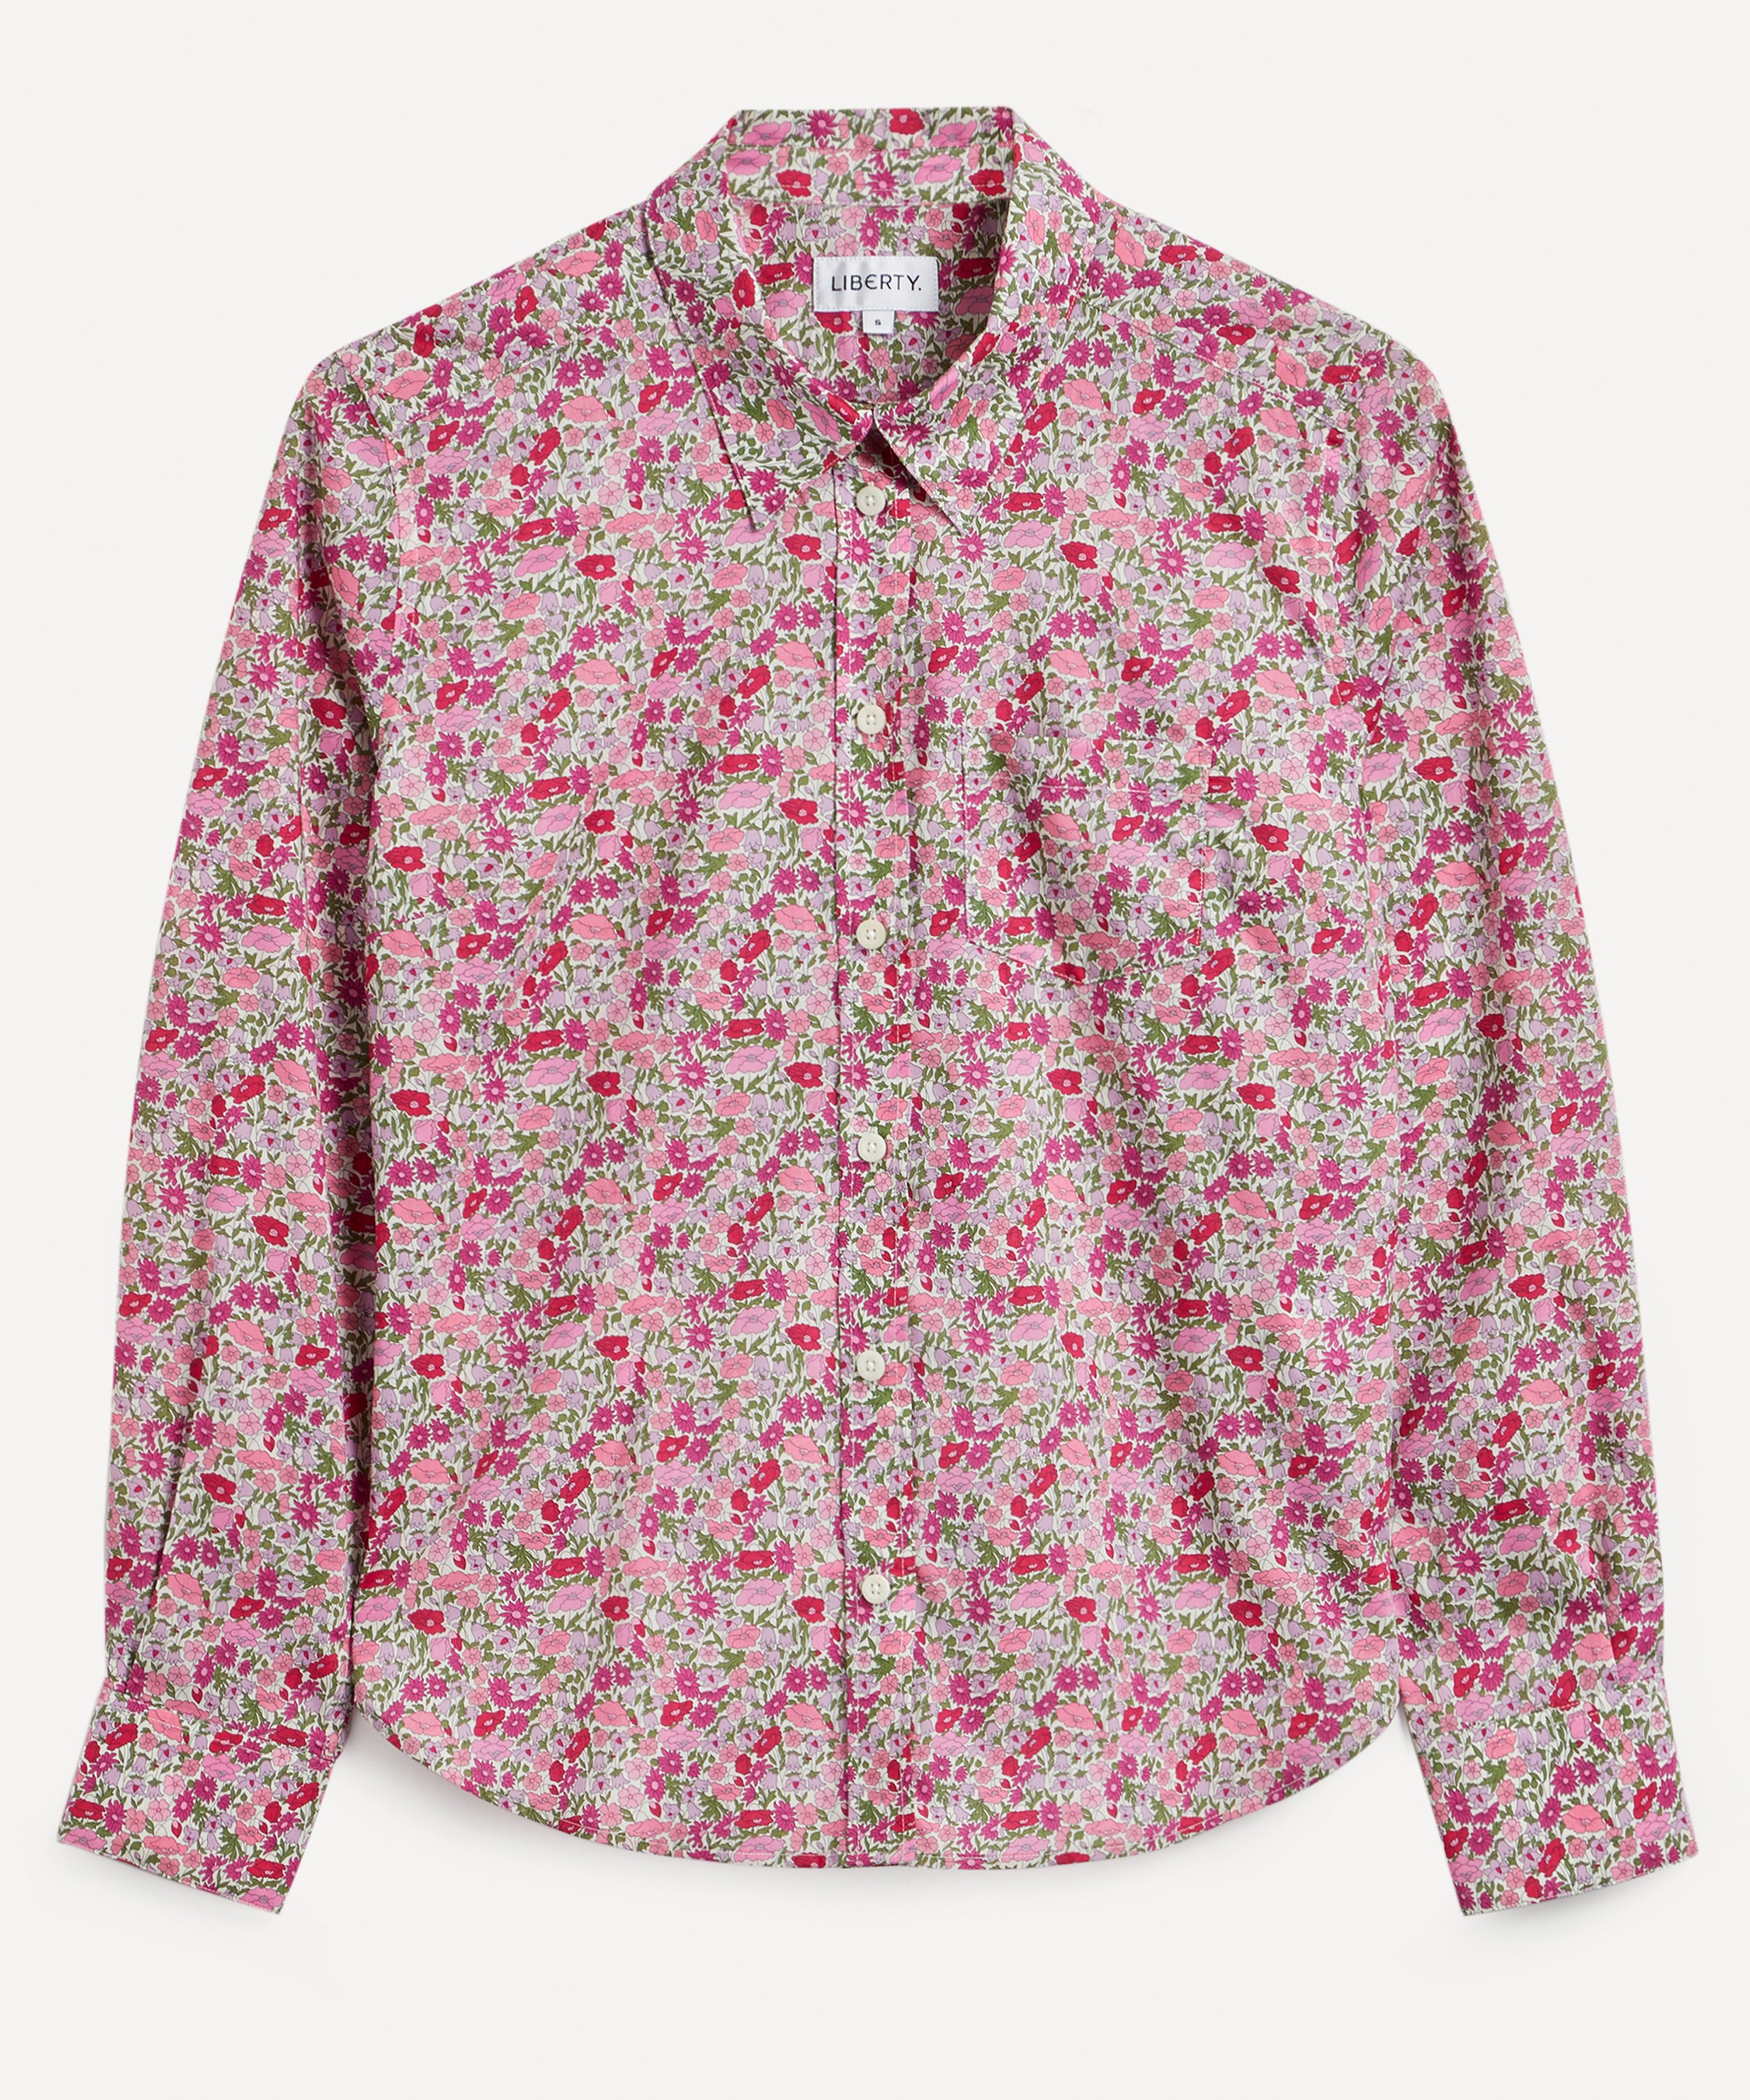 Liberty - Poppy Forest Fitted Tana Lawn™ Cotton Shirt